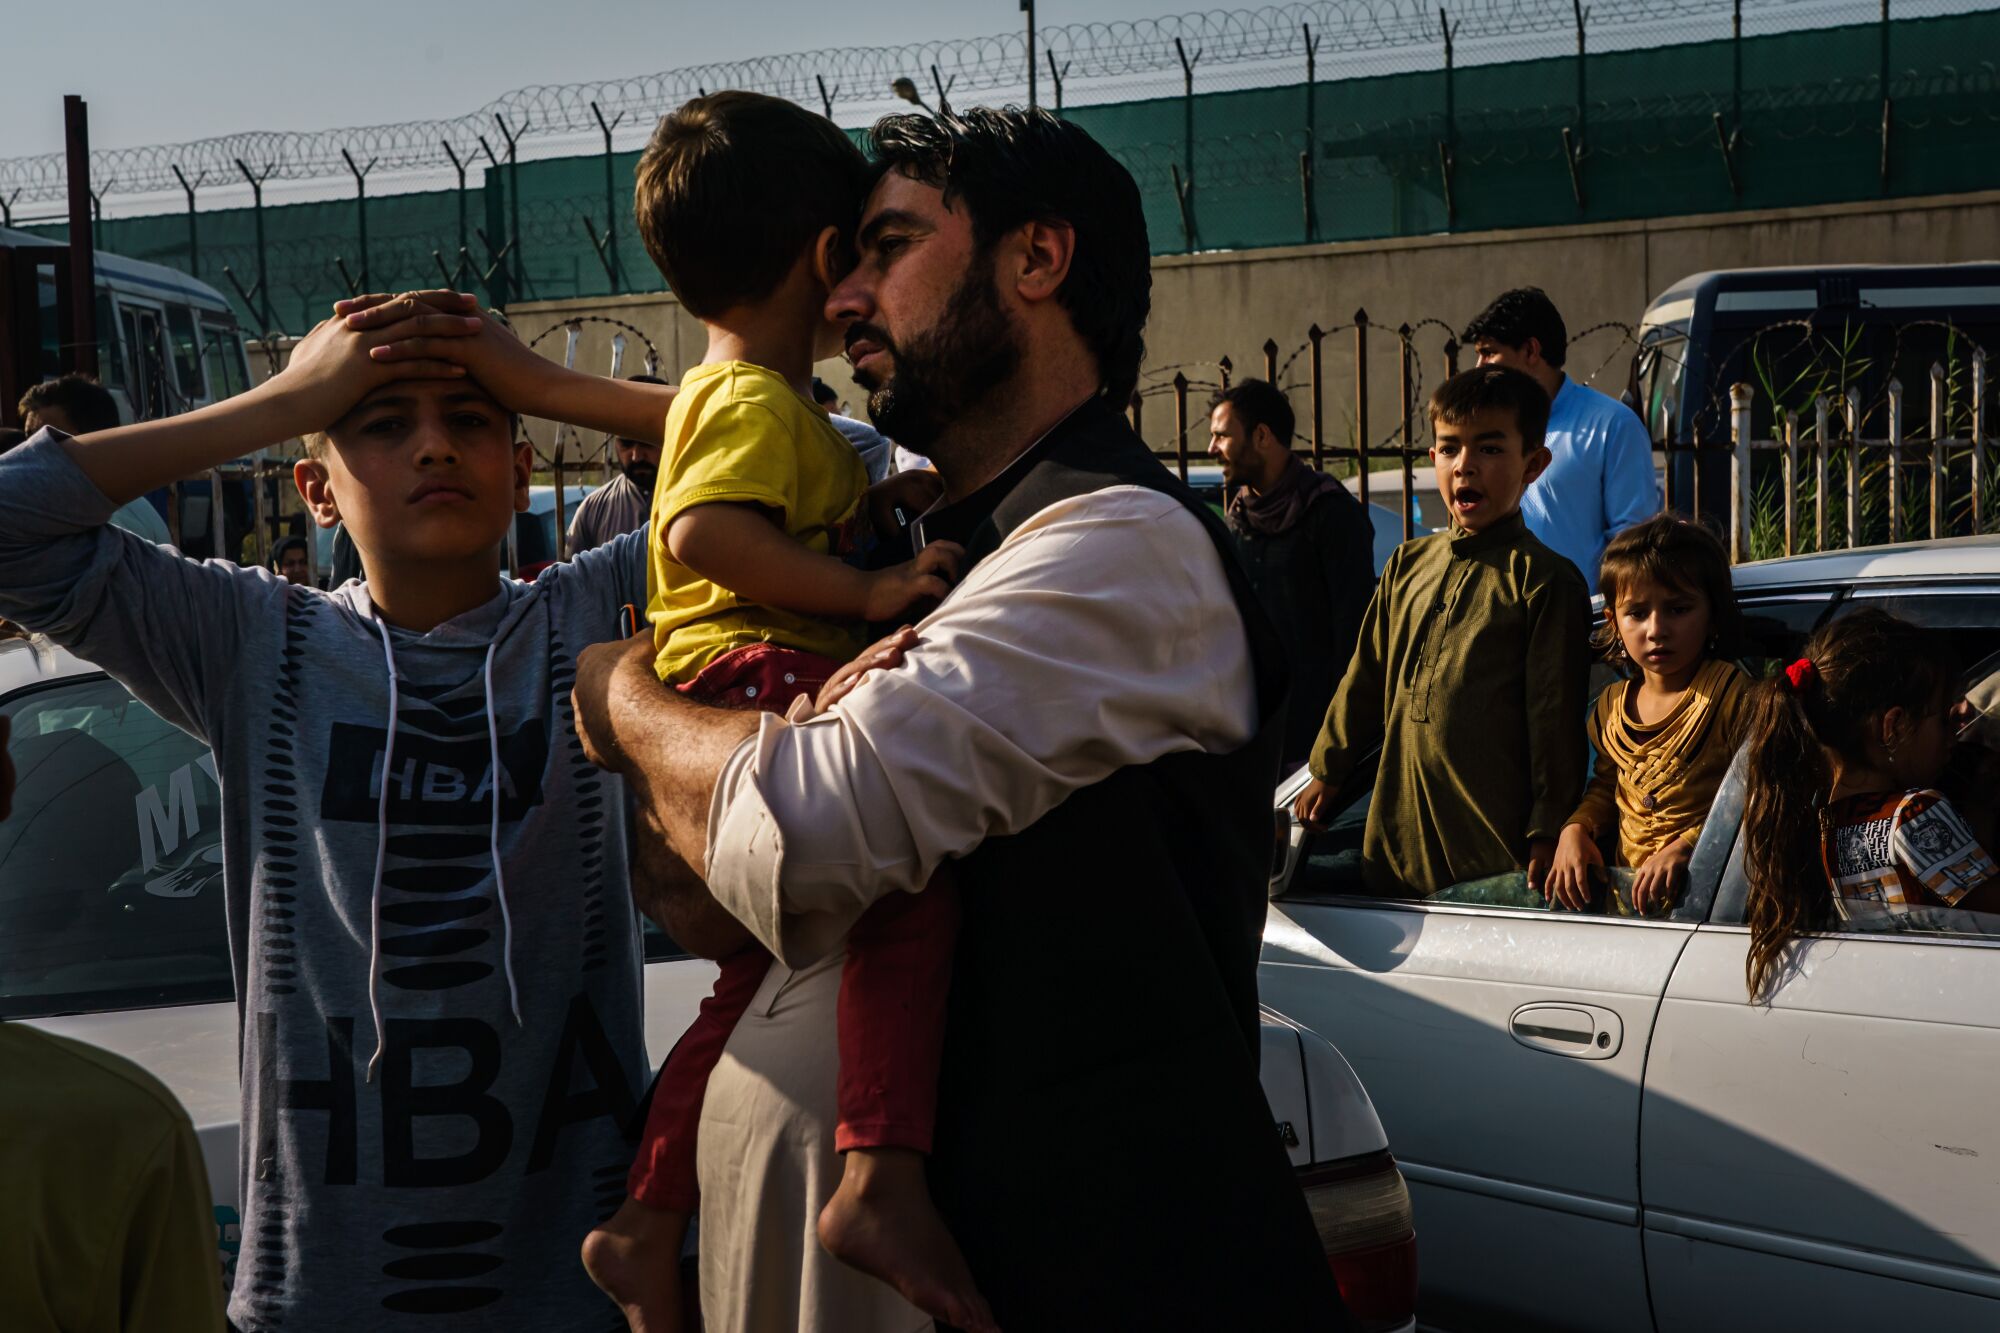 A father with two boys on the road to the military entrance of the airport for evacuations in Kabul, Afghanistan.